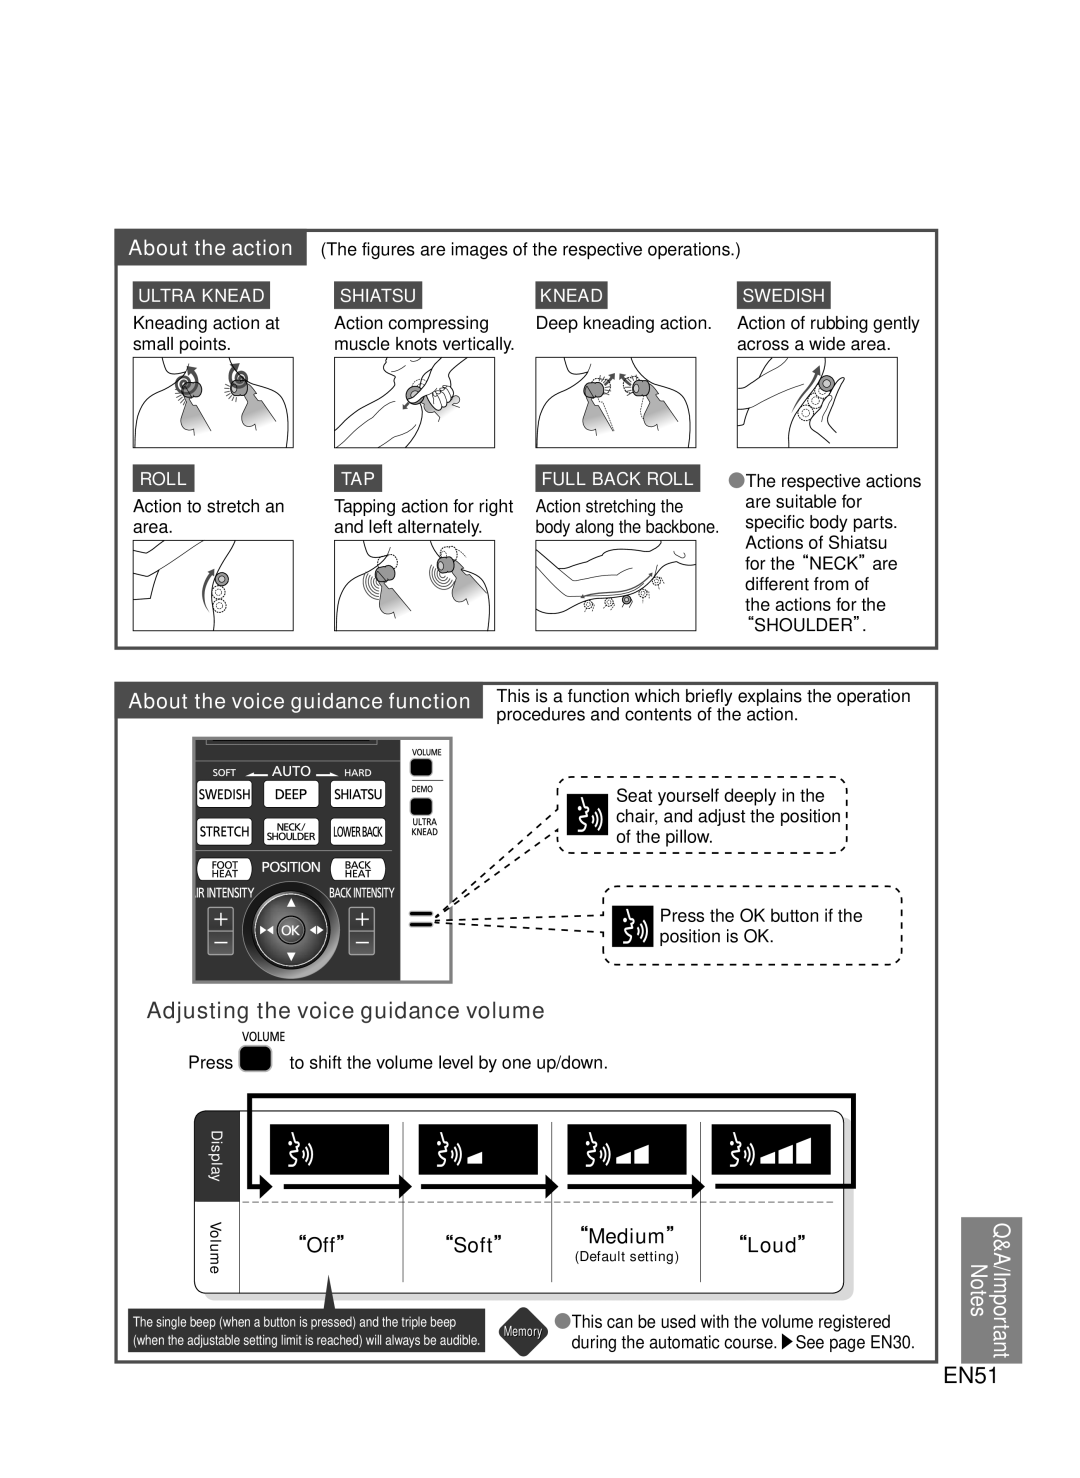 Panasonic EP-MA73 Adjusting the voice guidance volume, EN51, About the voice guidance function, “Off ”, “Soft ”, “Medium ” 